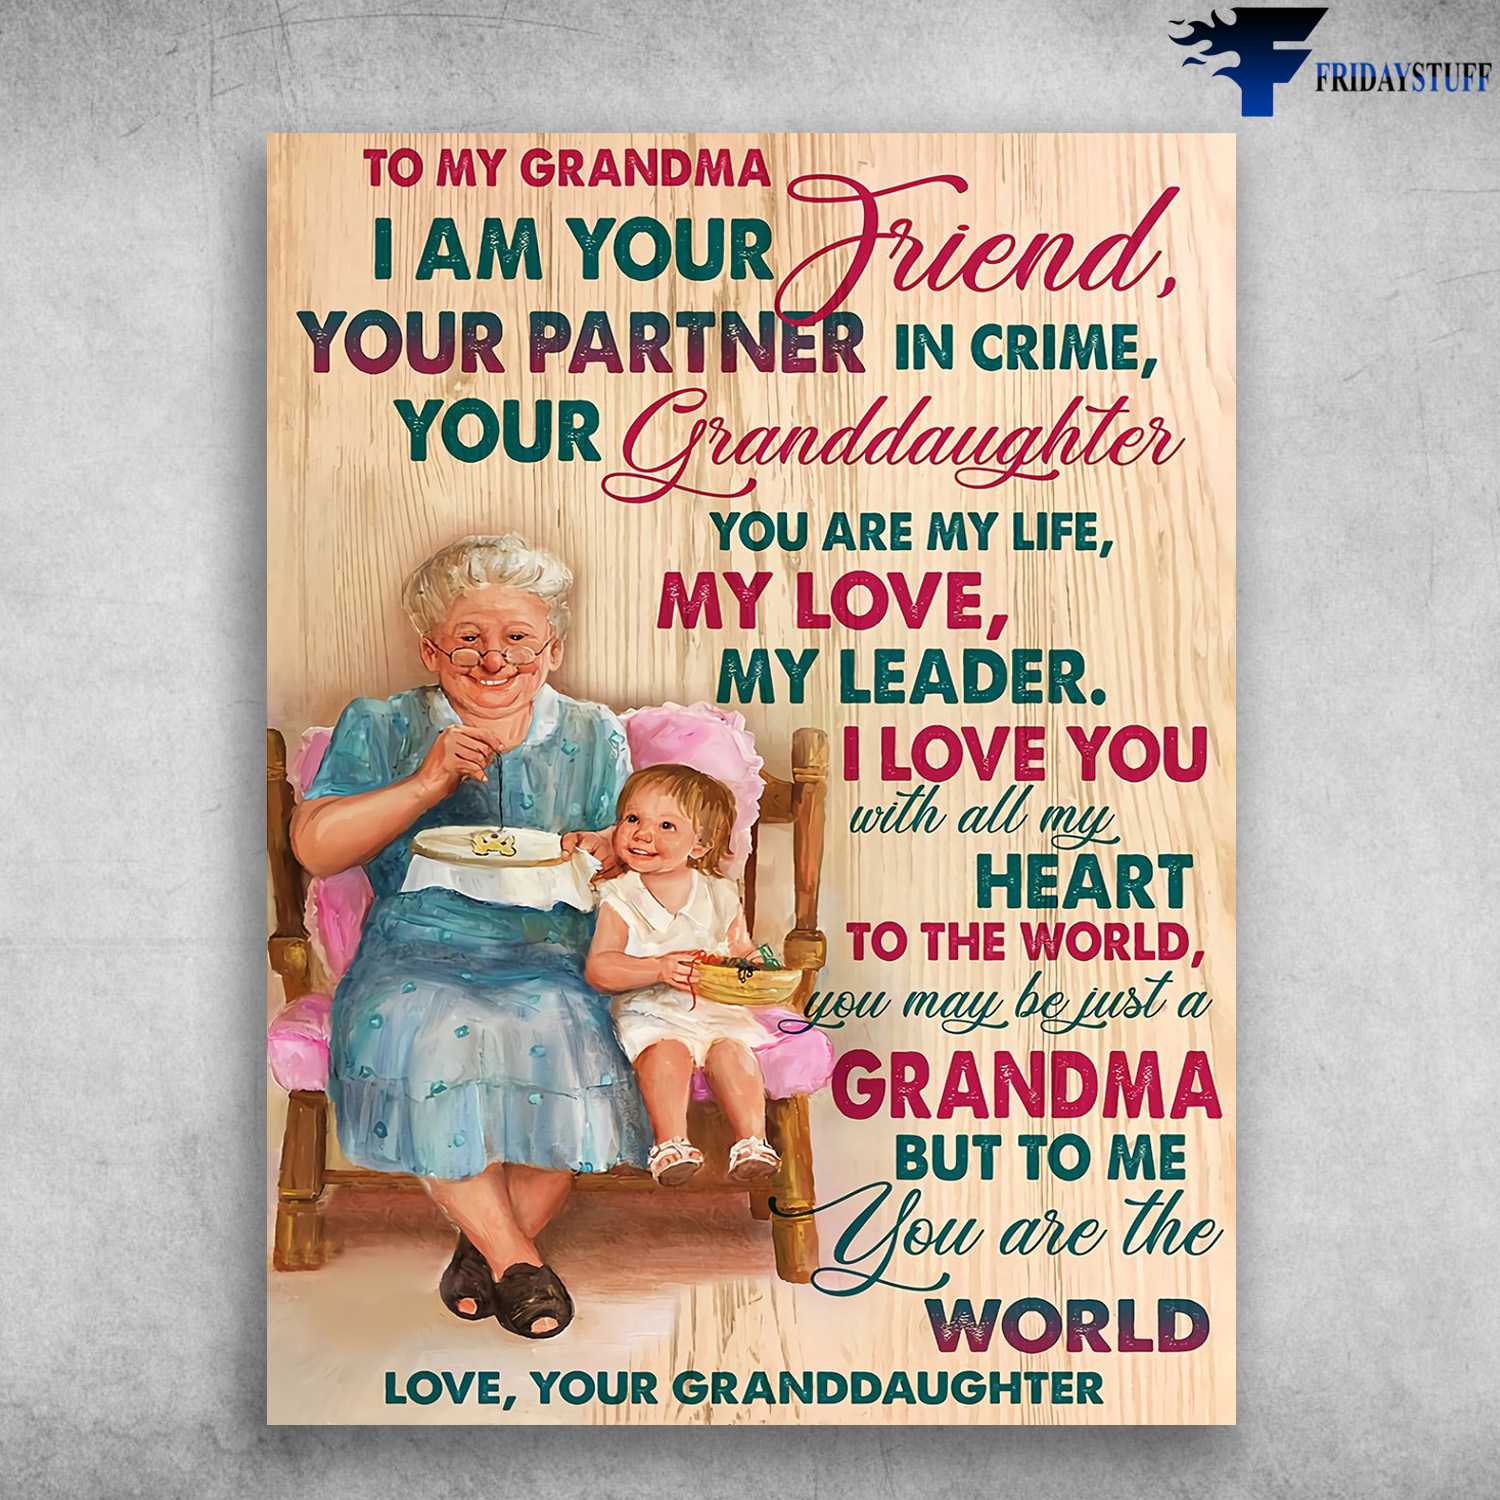 Grandma Poster, Gradma Granddaughter - To My Grandma, I Am Your Friend, Your Partner In Crime, Your Granddaughter, You Are My Life, My Love, My Leader, I Love You